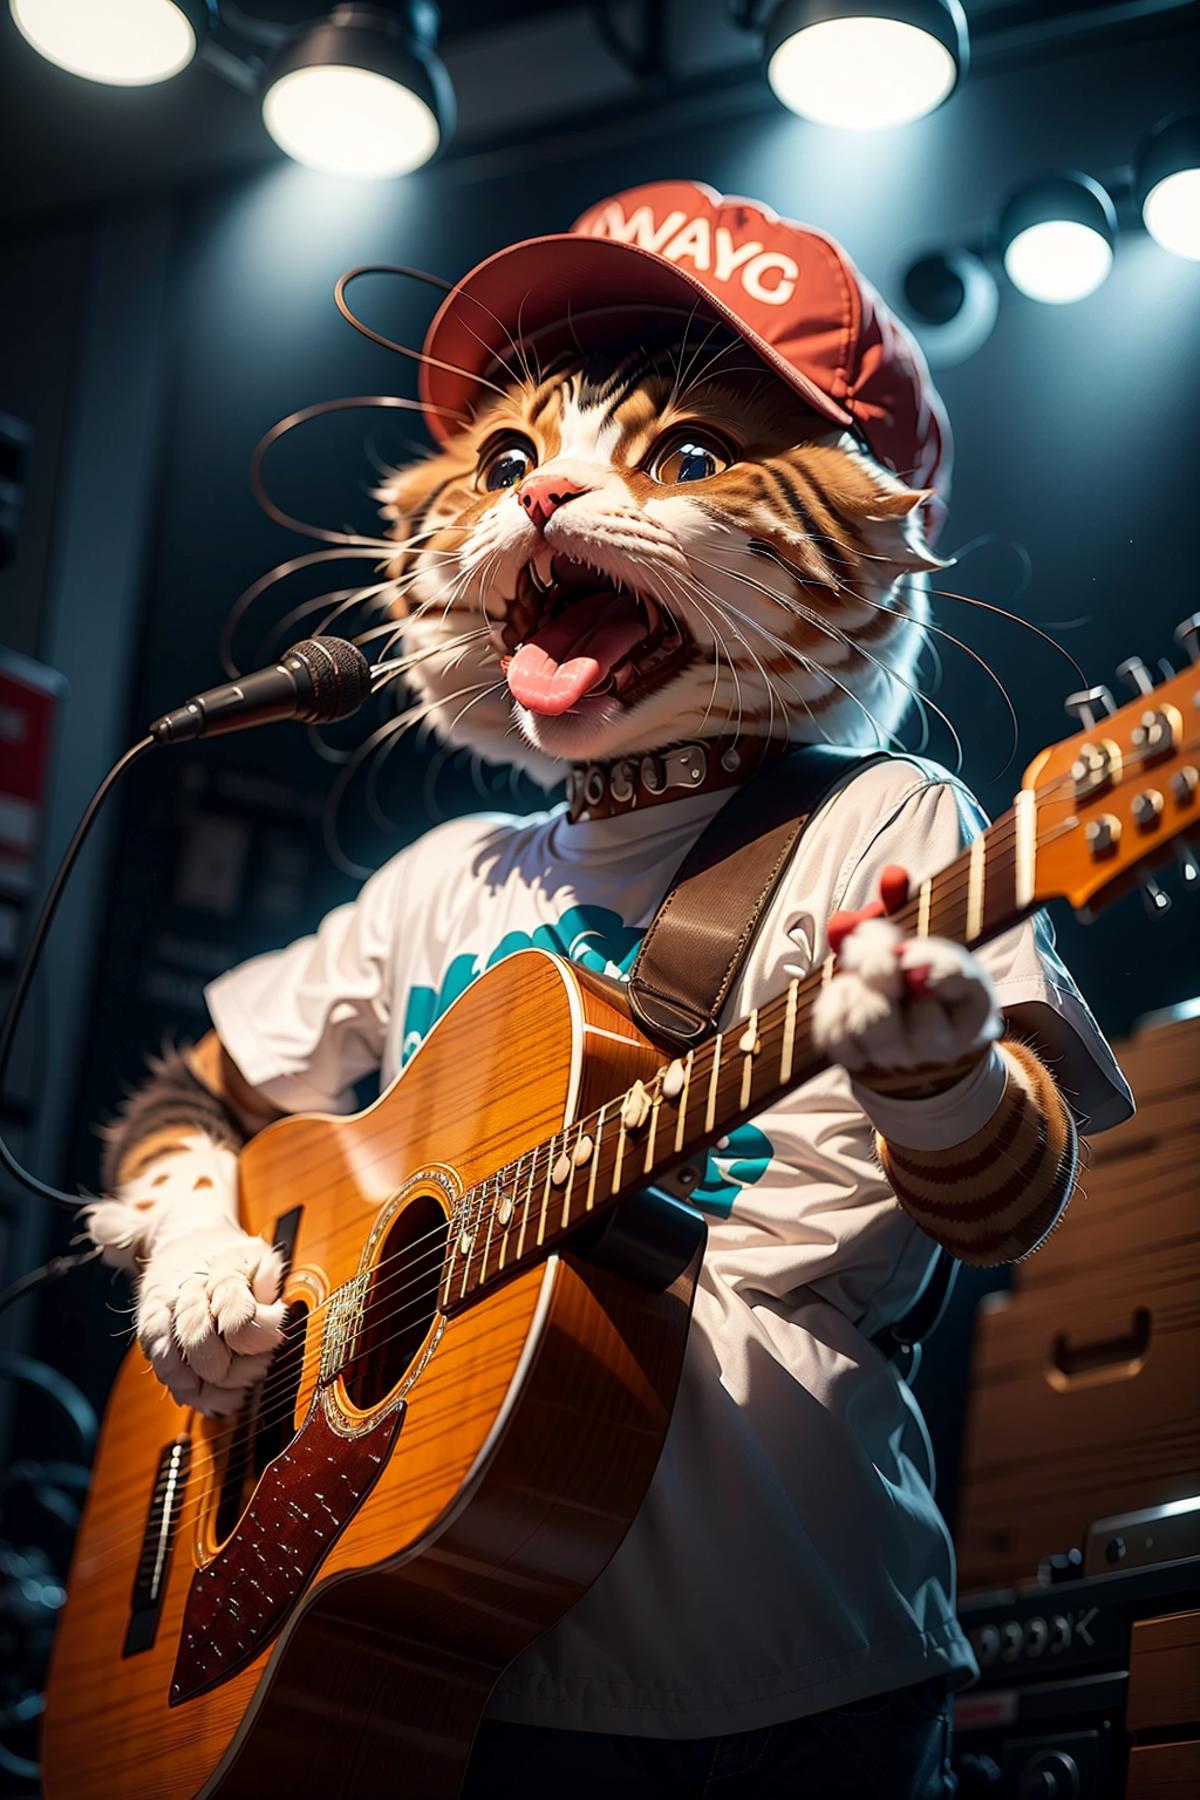 A cat playing guitar on stage, wearing a hat and a white shirt.